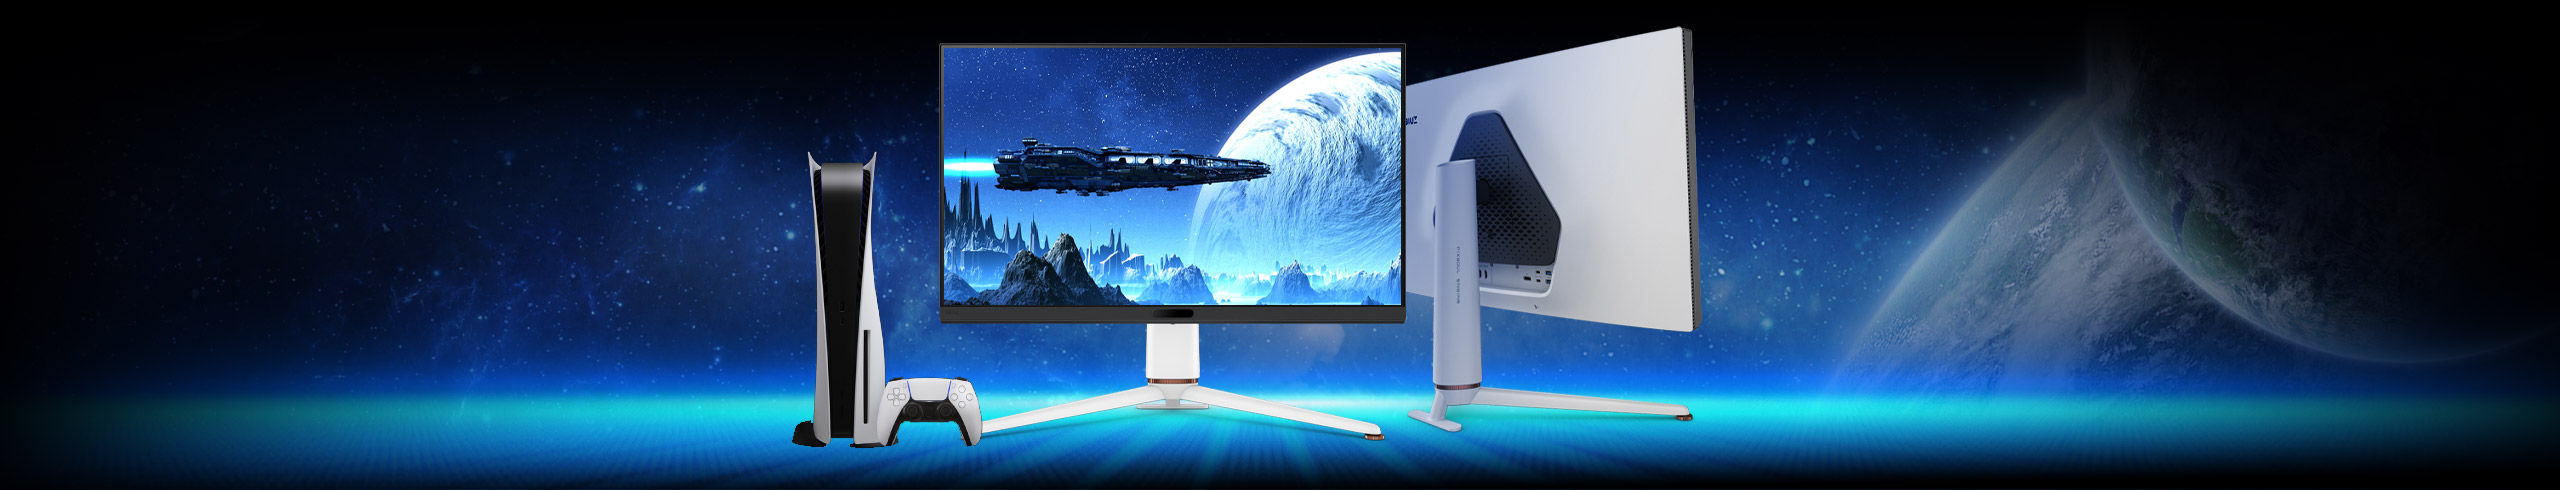 BenQ MOBIUZ gaming monitor provide total immersion in the game